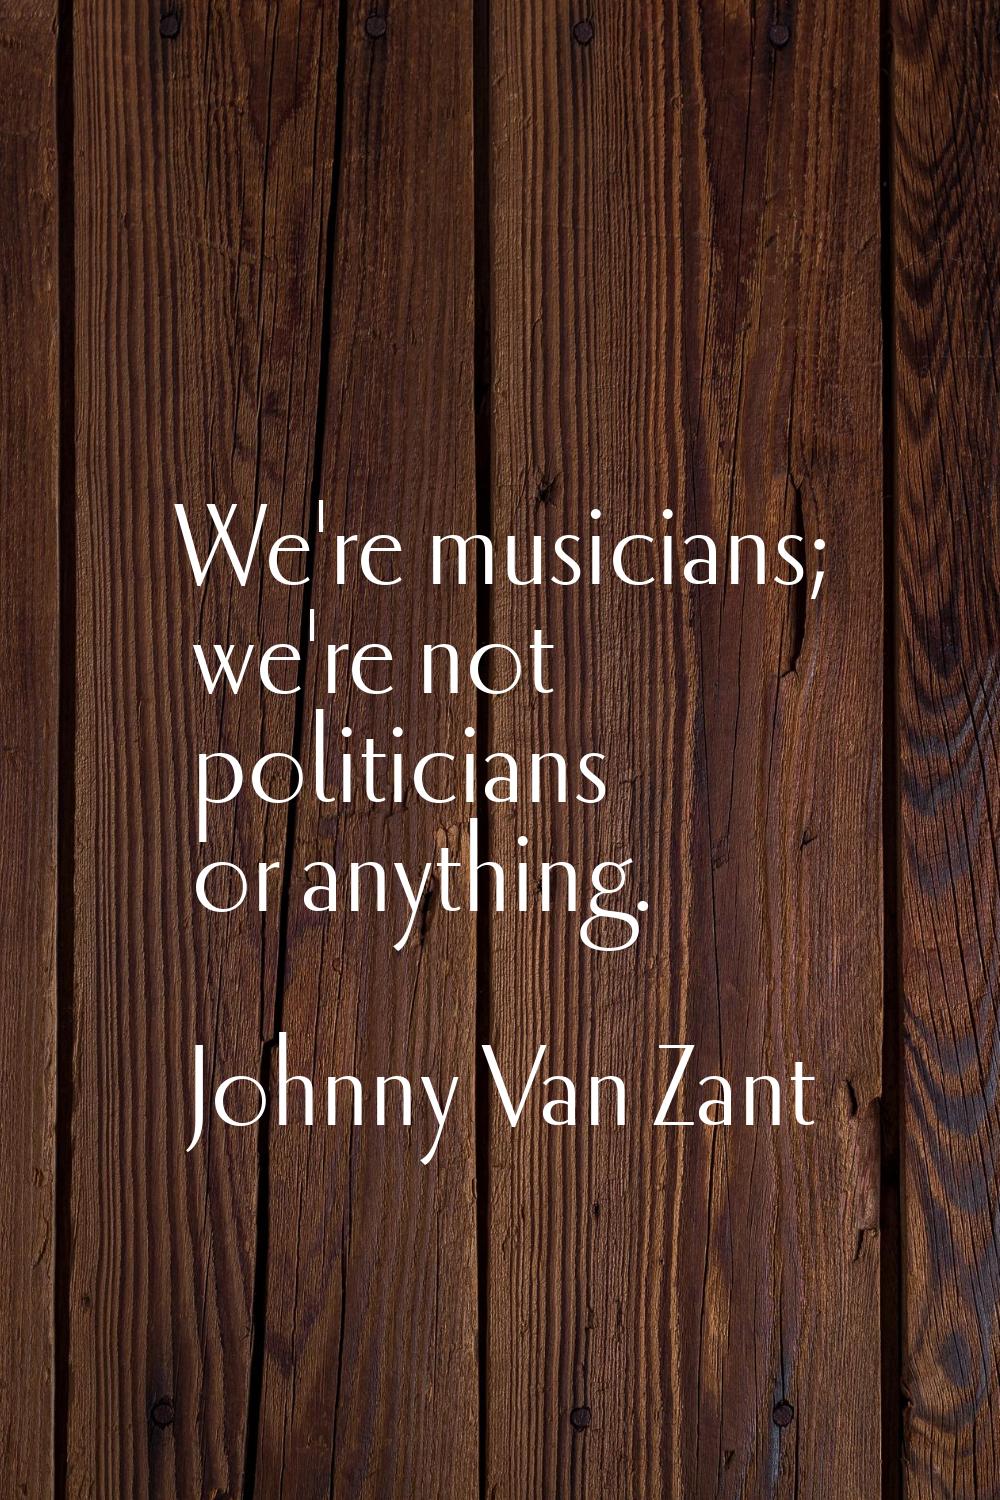 We're musicians; we're not politicians or anything.